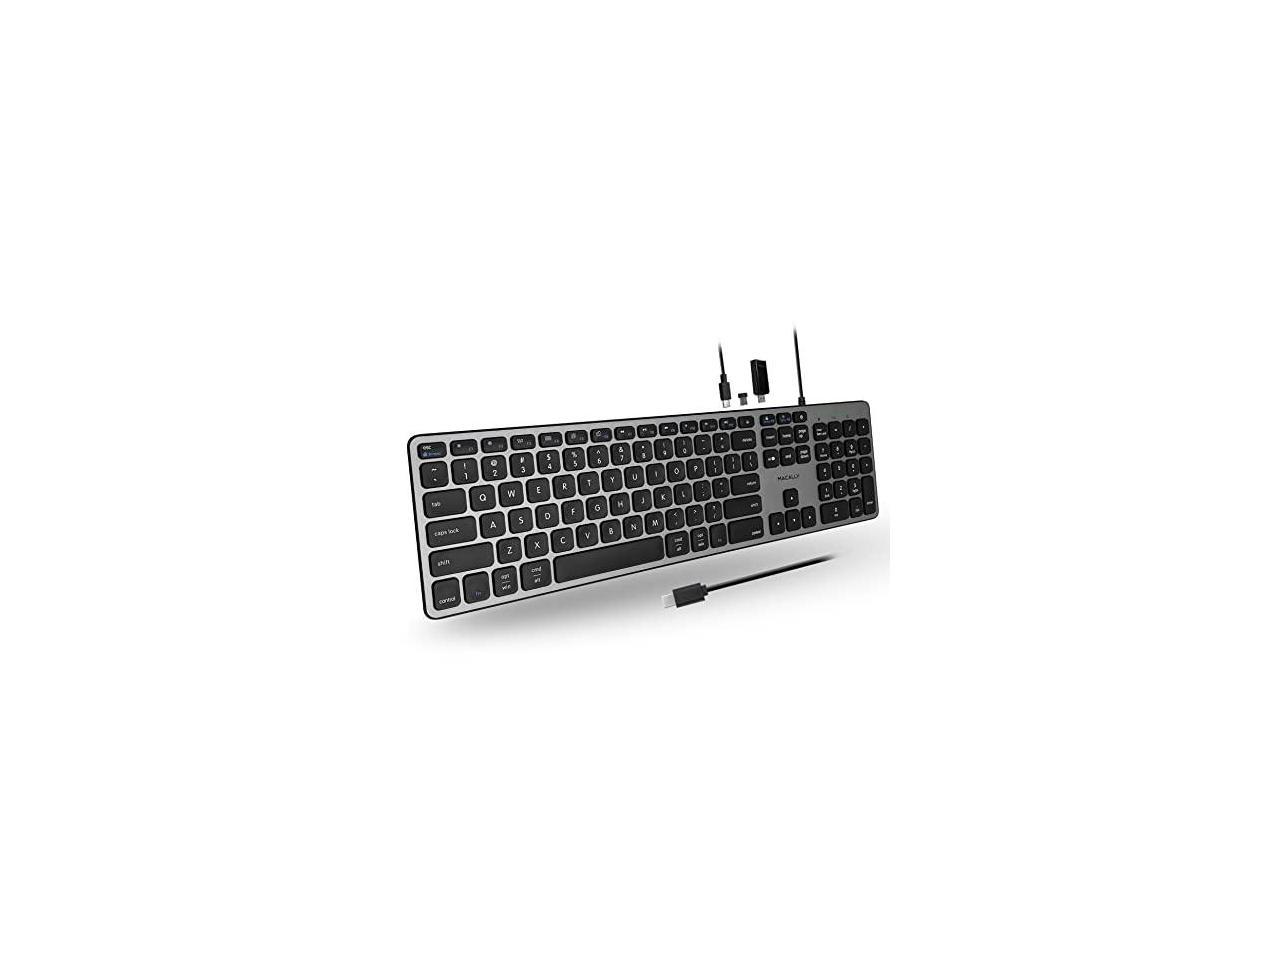 connecting apple keyboard to pc